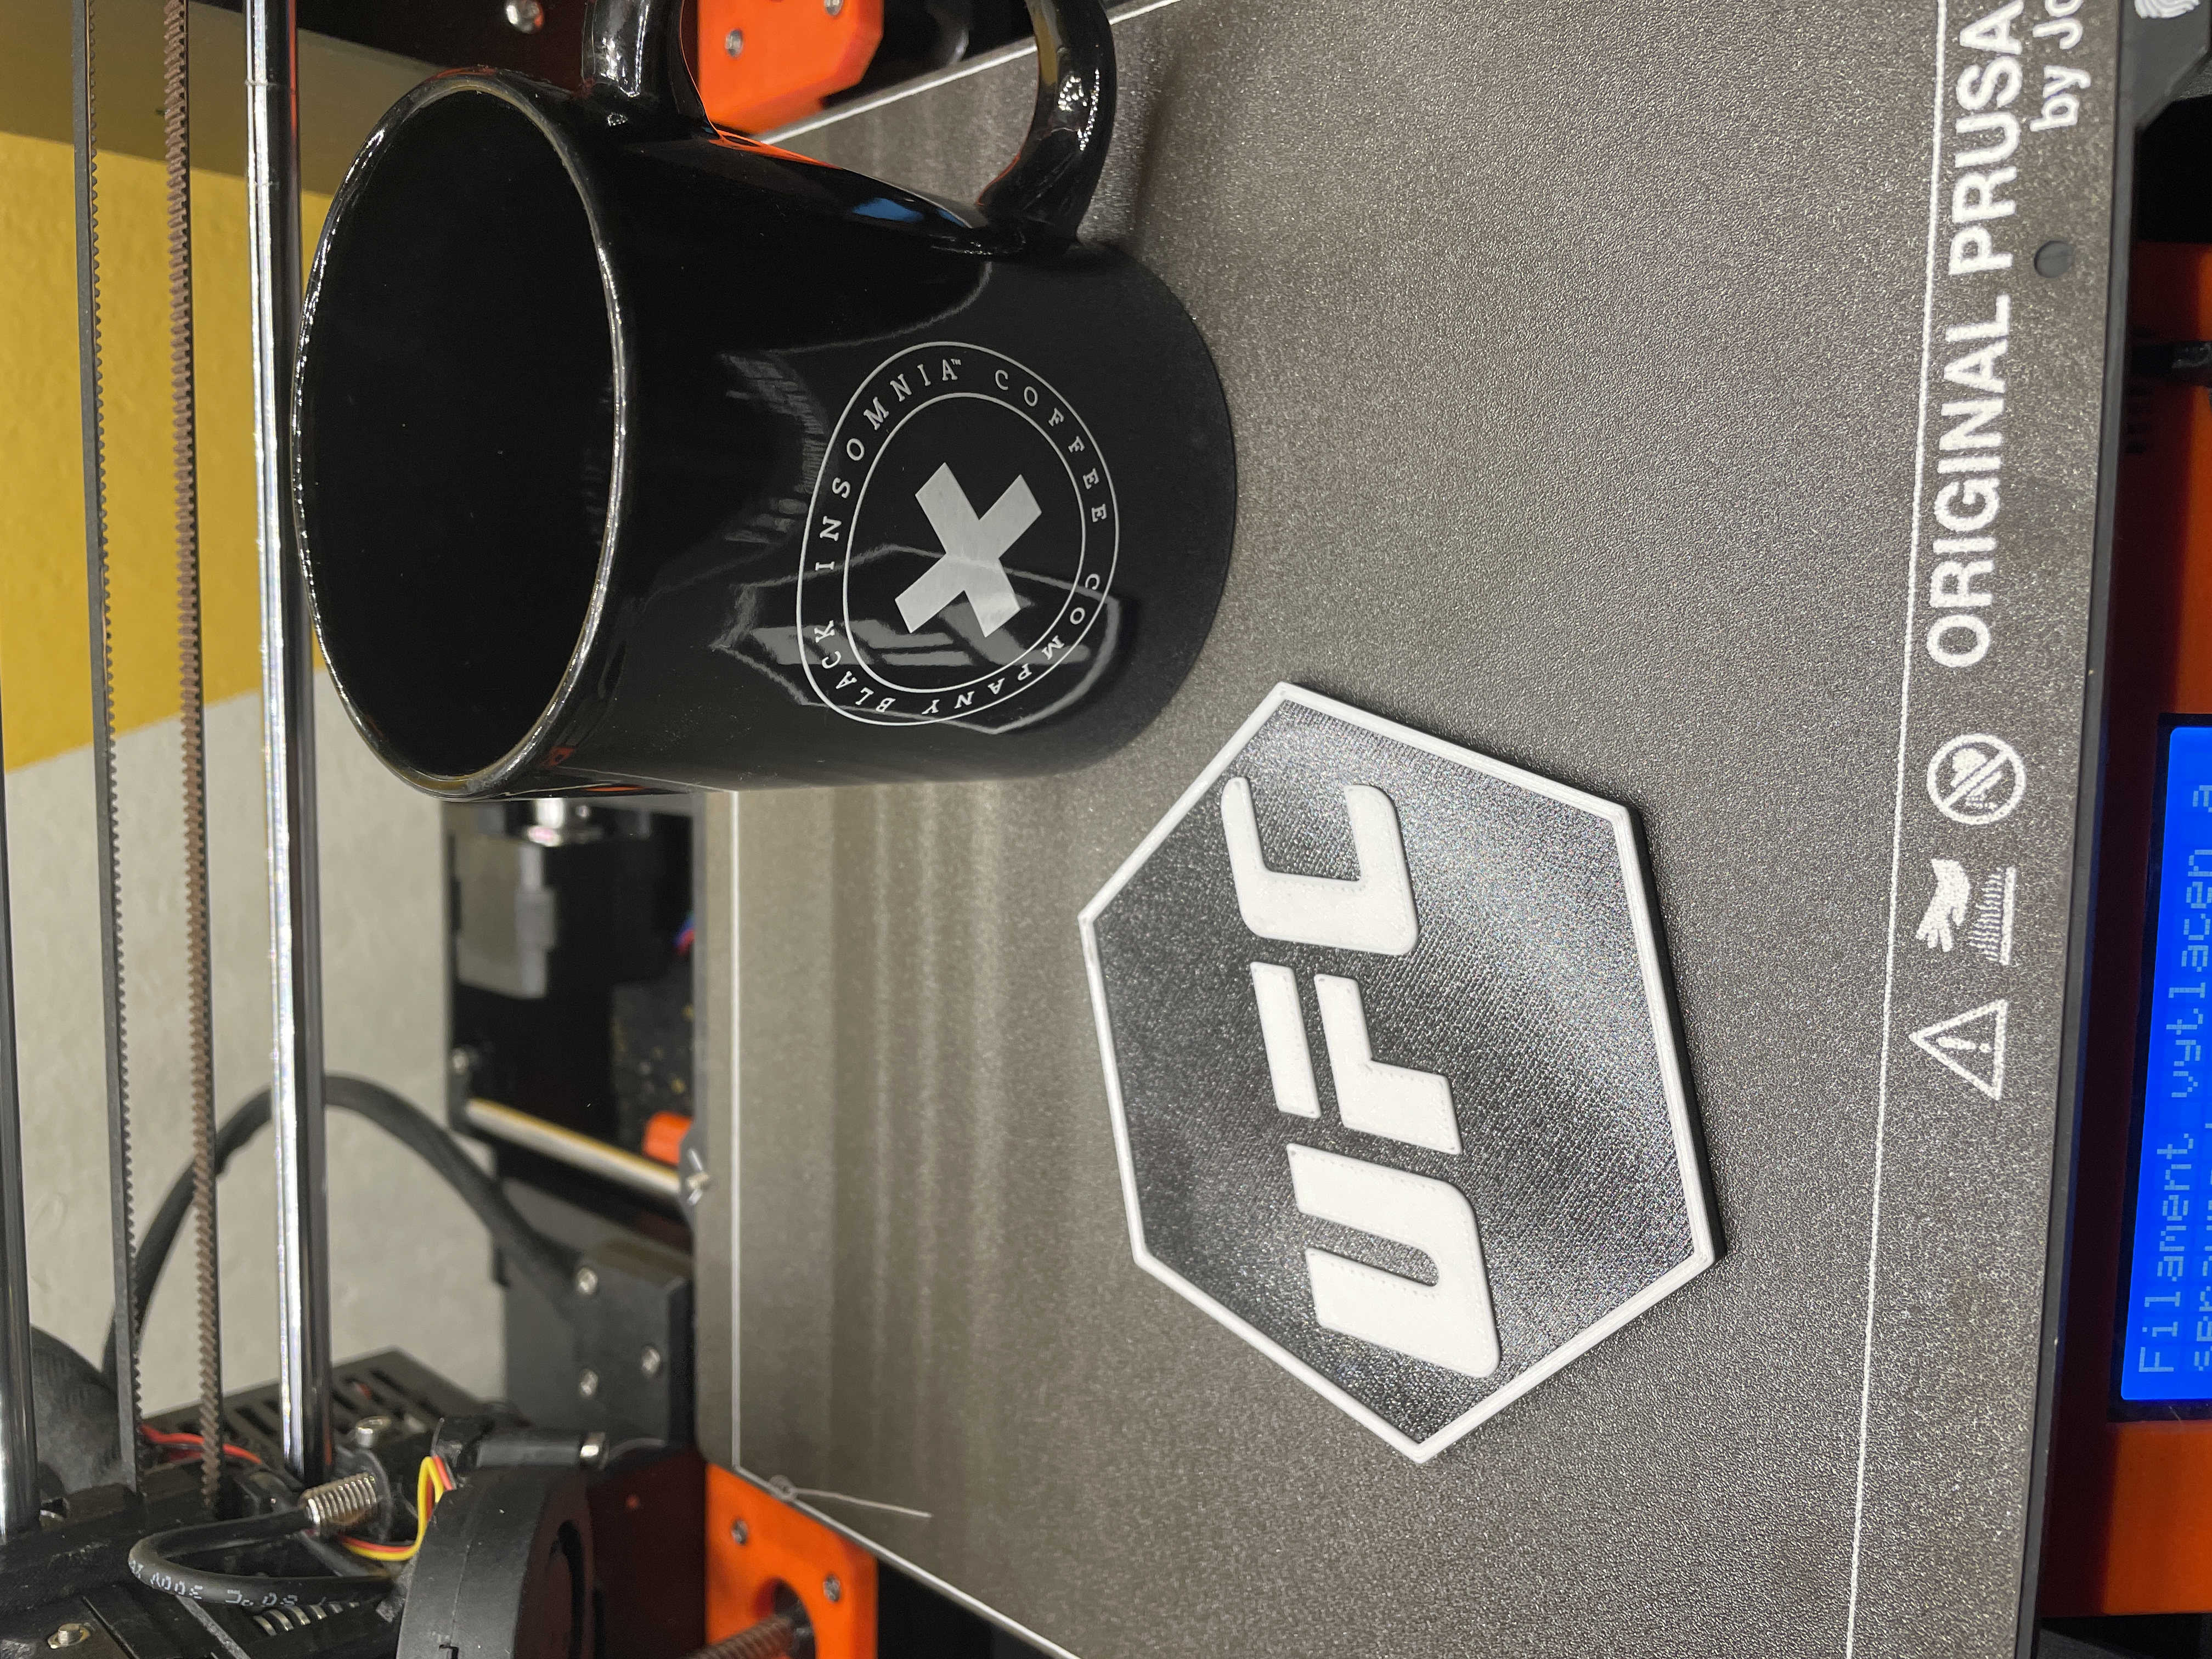 Coaster with UFC logo - not necessary multimaterial.